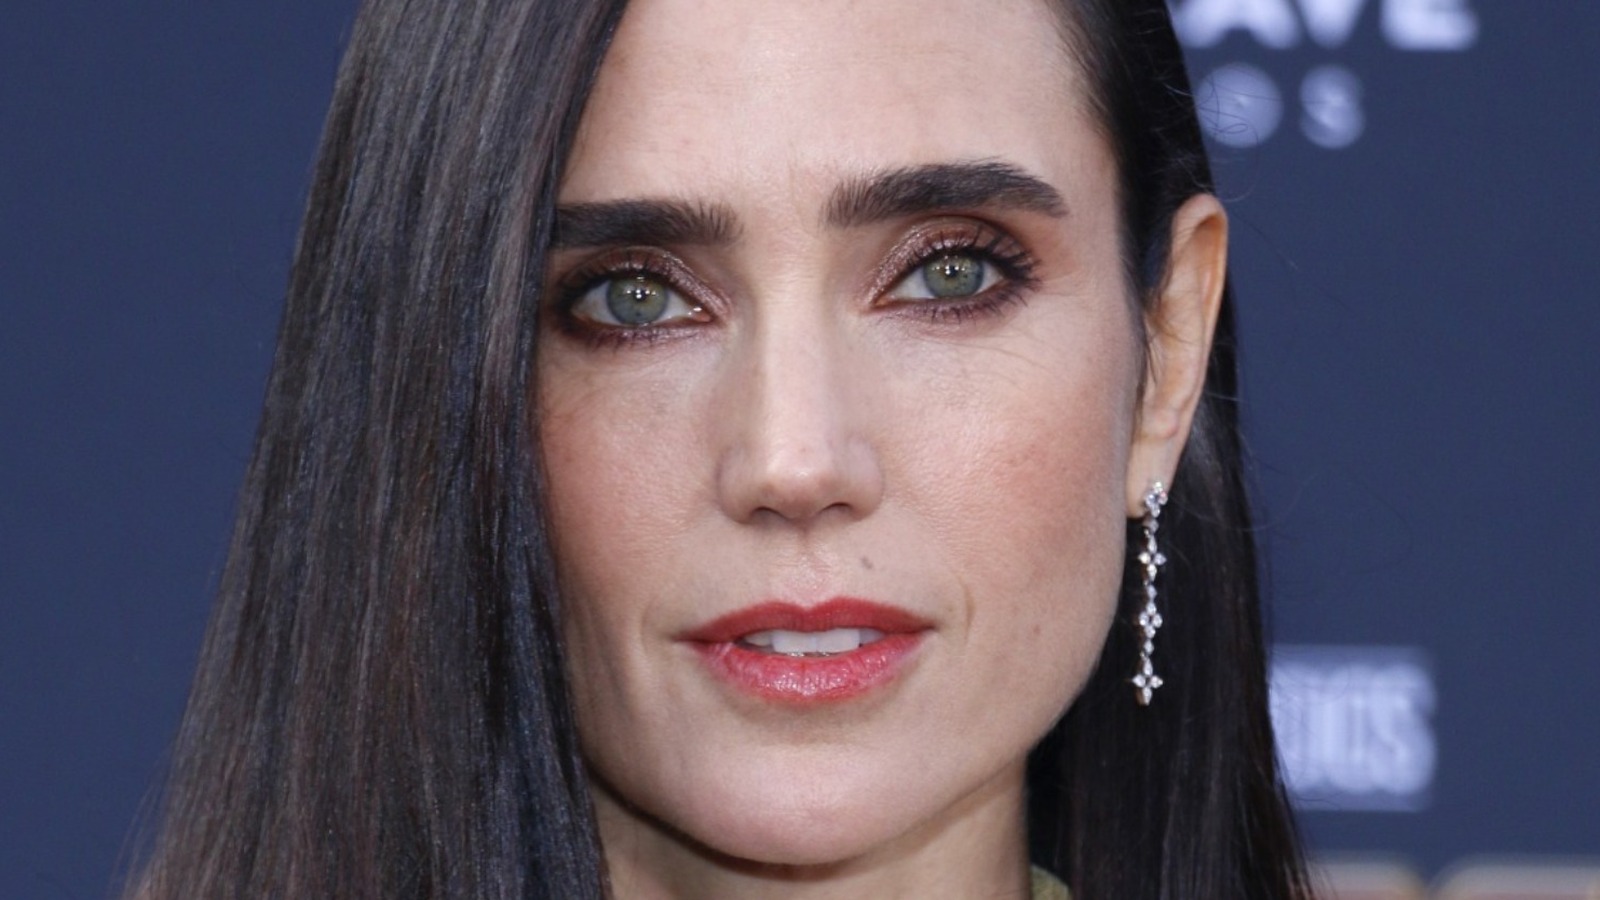 Who are Jennifer Connelly's kids?